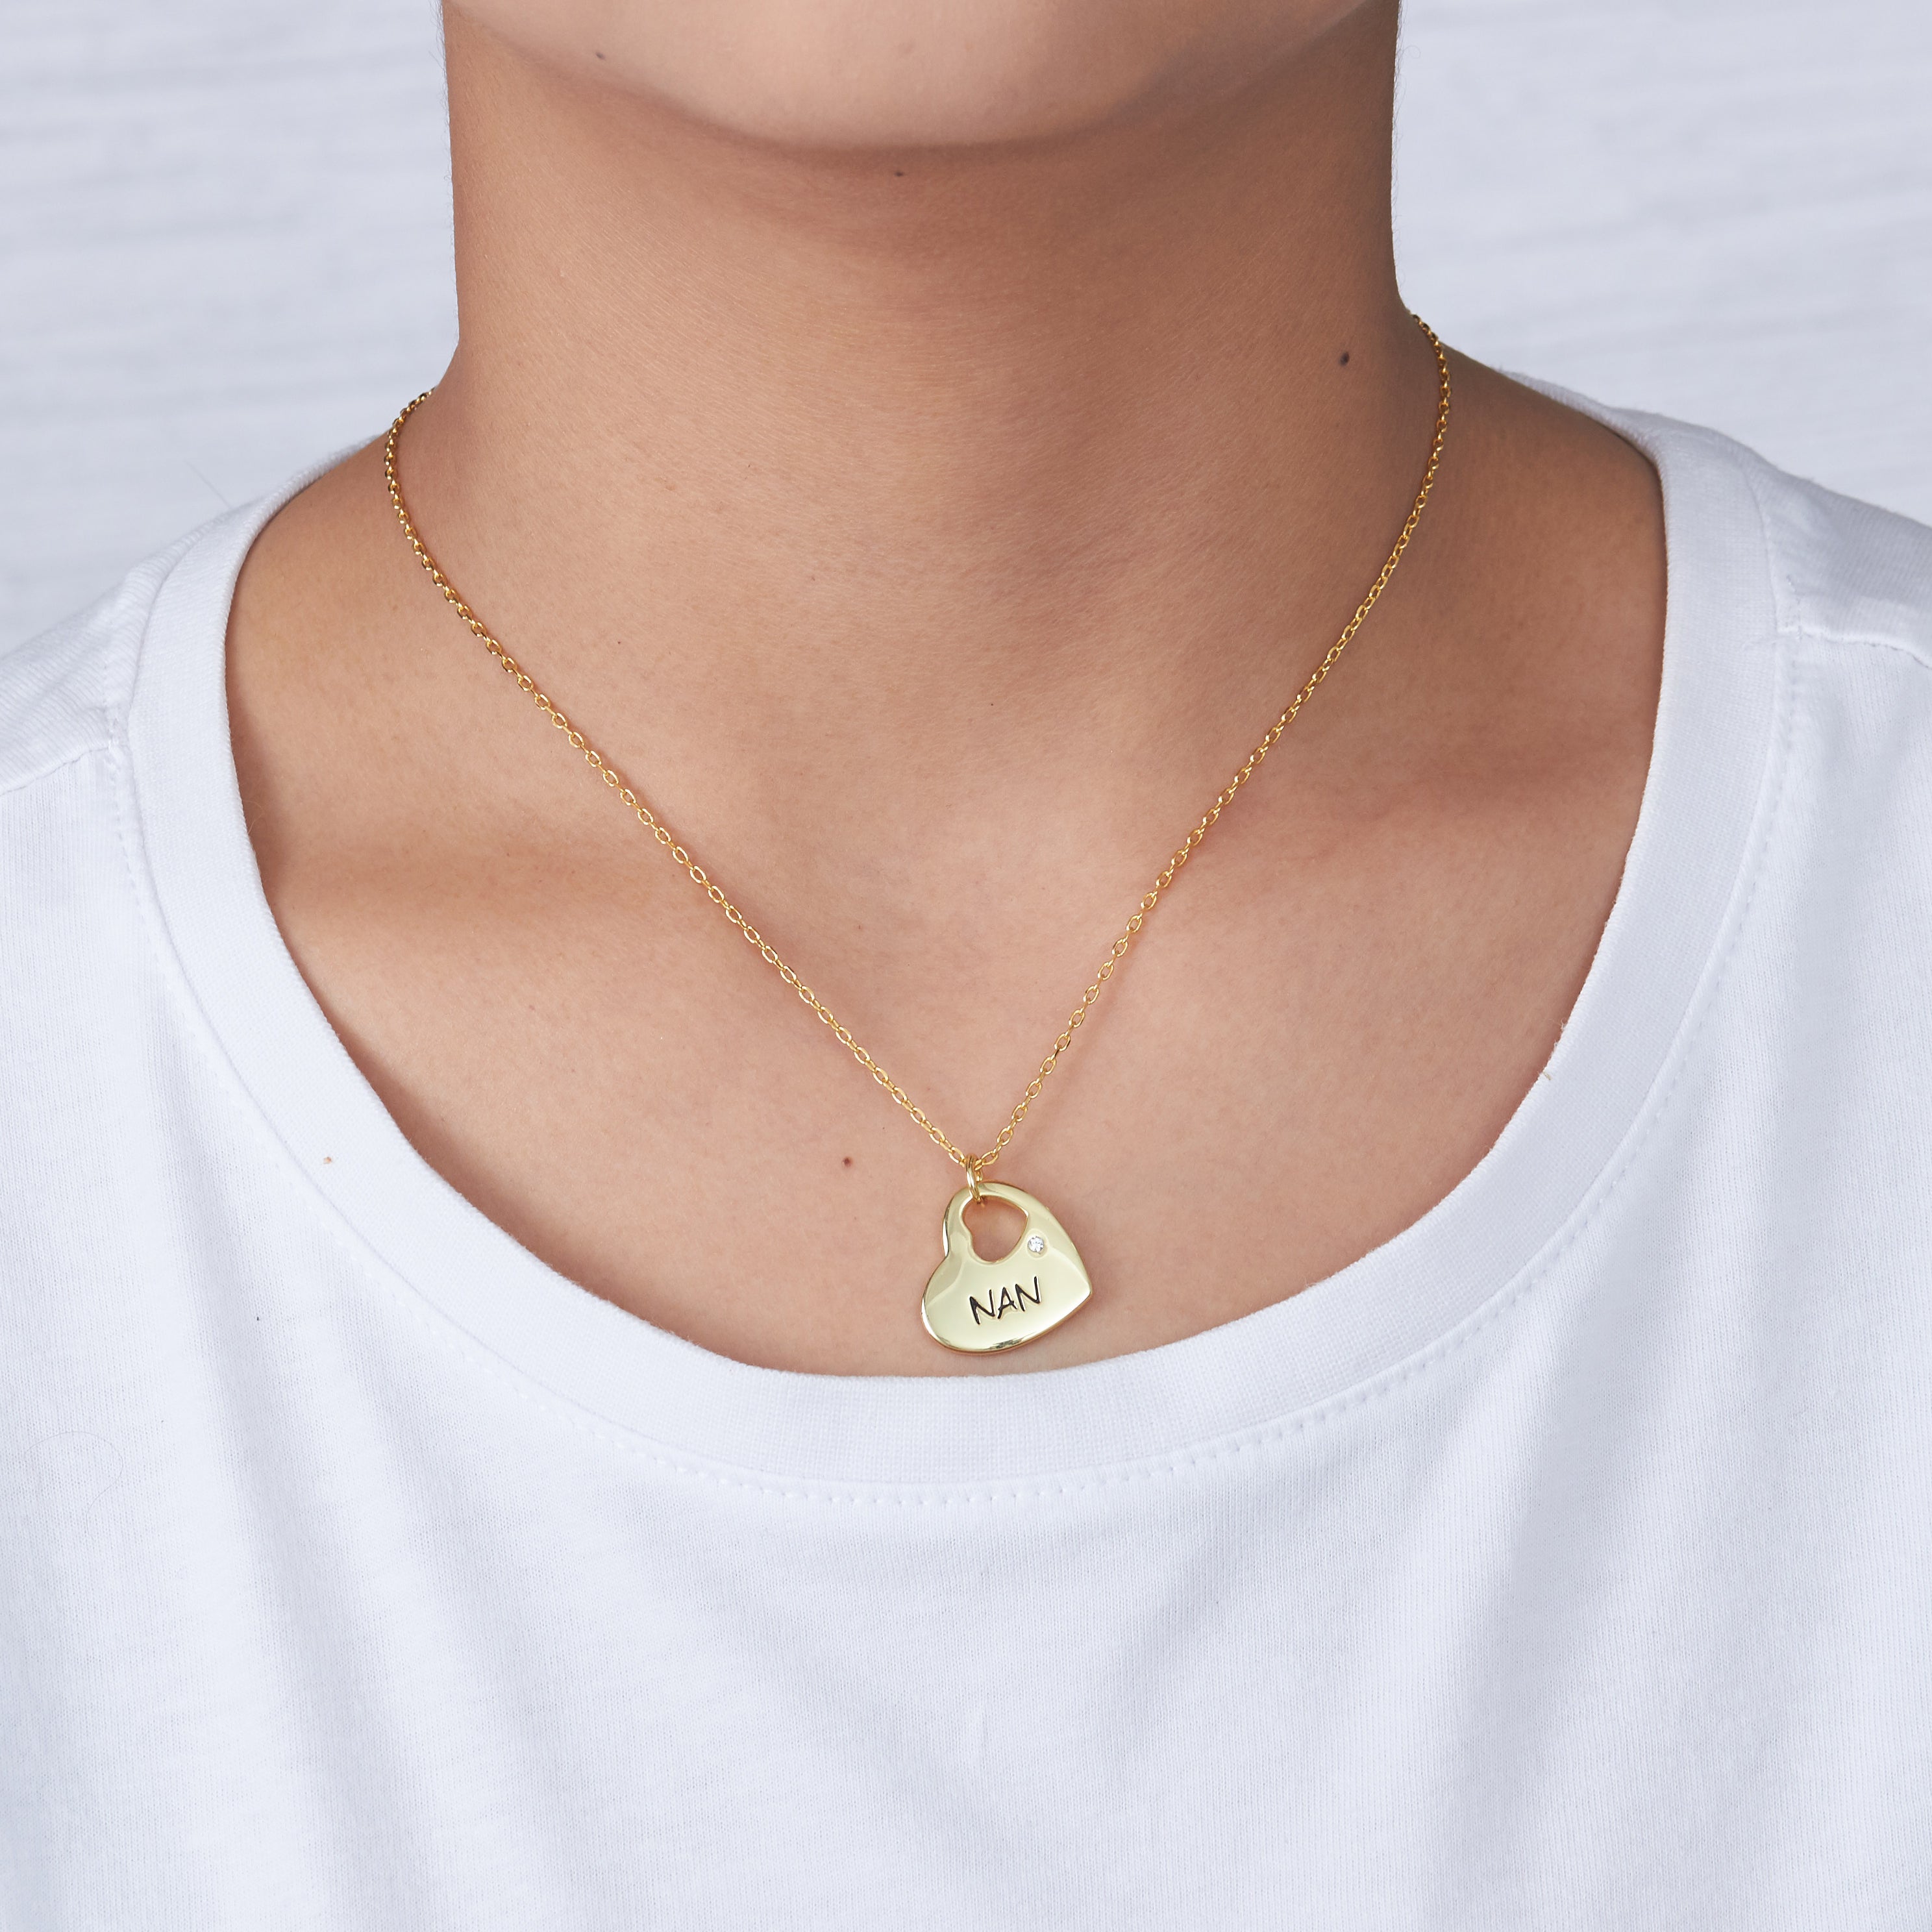 Gold Nan Heart Necklace Created with Zircondia® Crystals